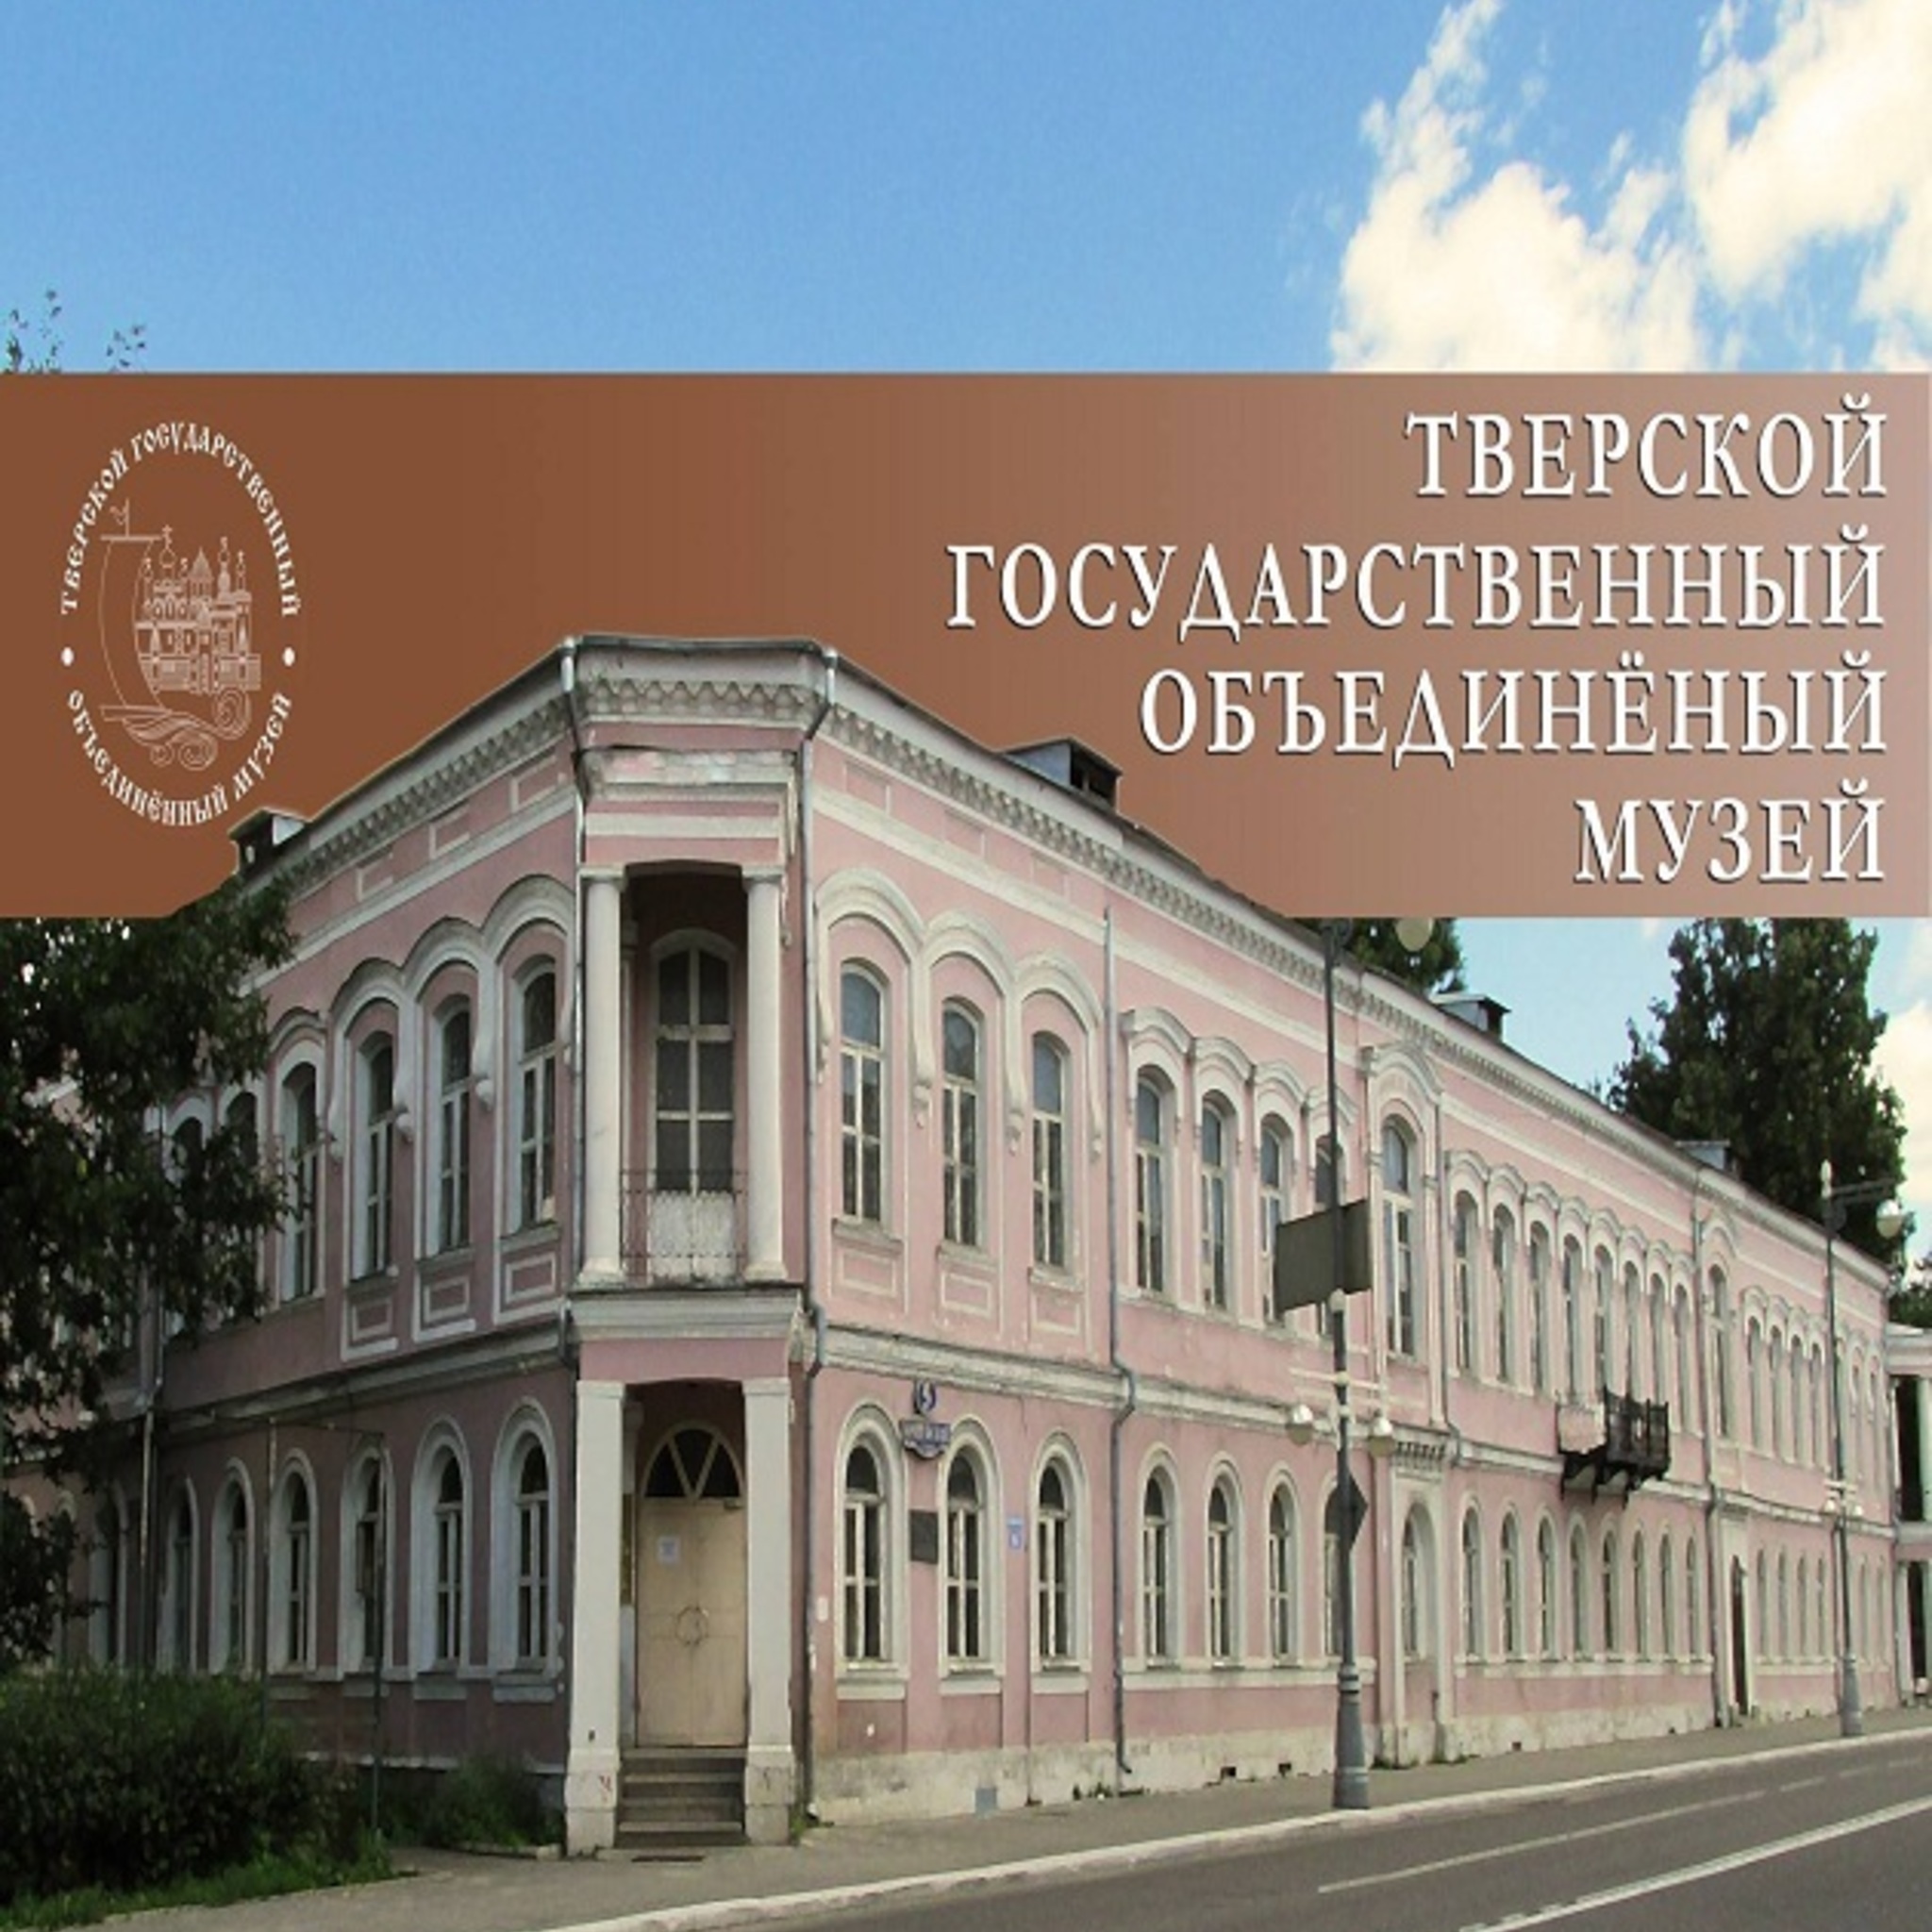 Our events Tver State United Museum on November 2016